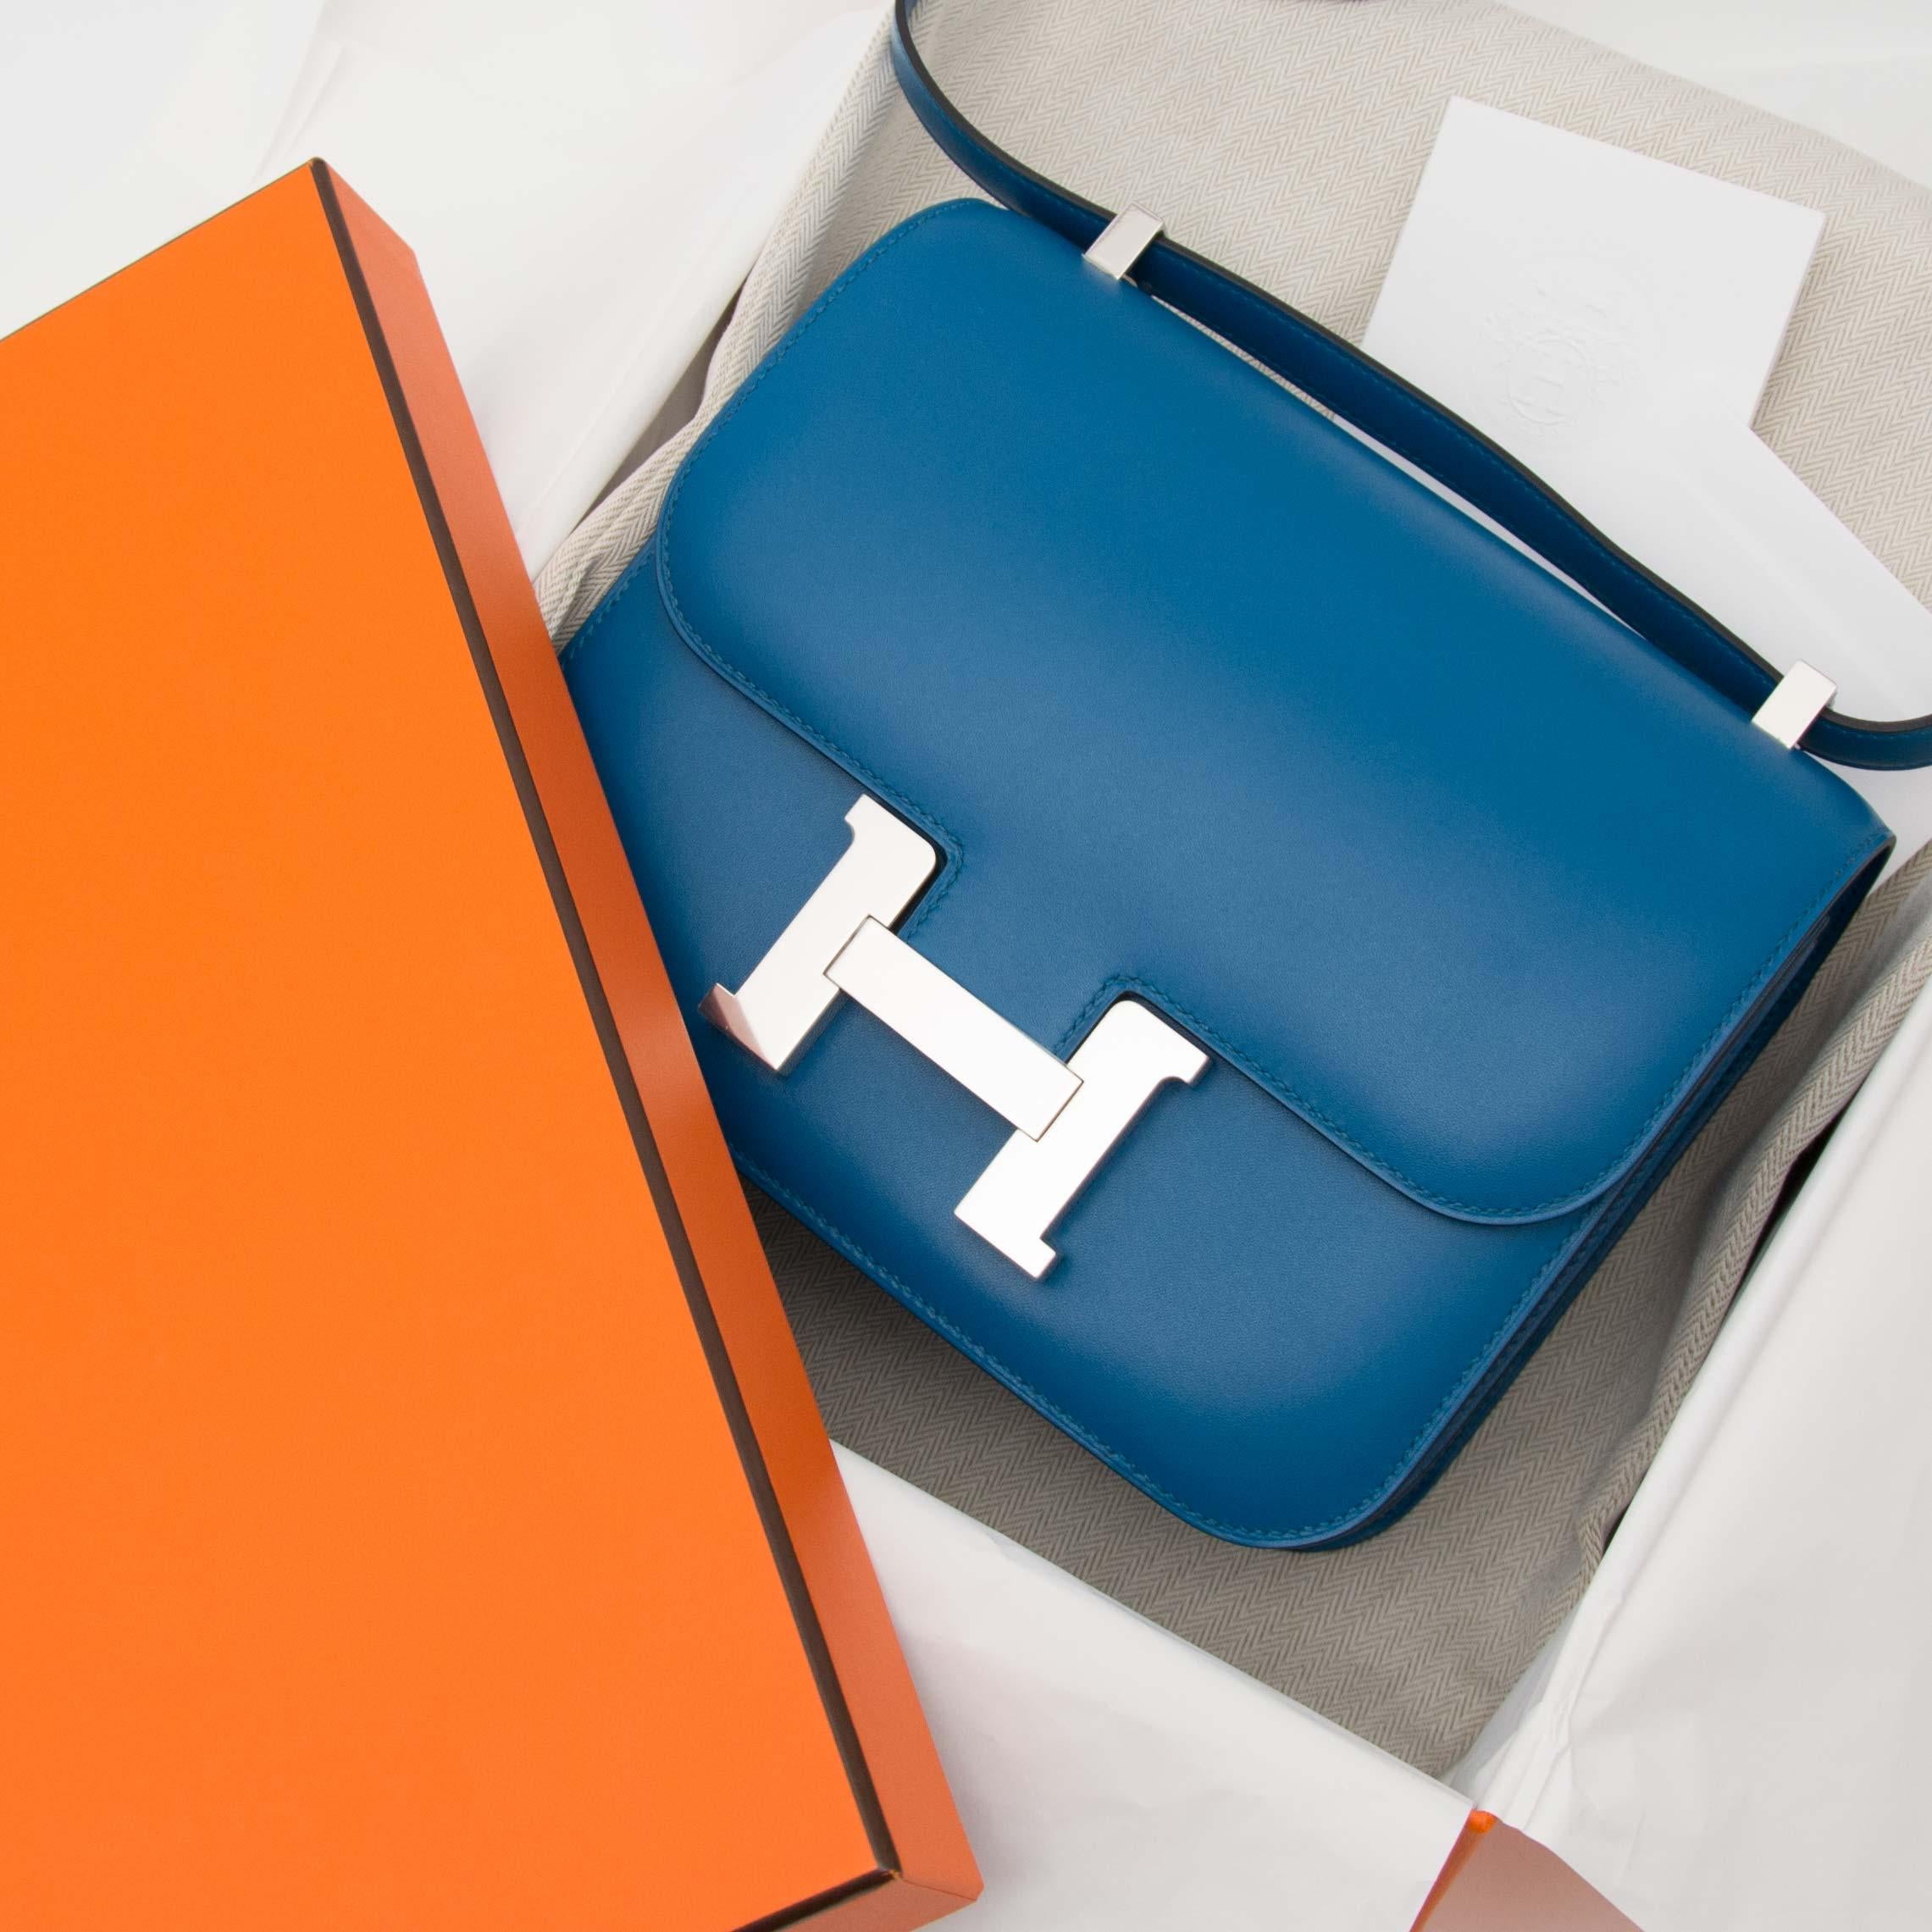 Never used, store fresh!

Never Used Hermes Constance III 24 Bleu Izmir Veau Tadelakt PHW

This elegant Hermès Constance bag comes in a vivit blue color called 'Bleu Izmir' and is finished with palladium toned hardware.
Veau tadelakt has no visible